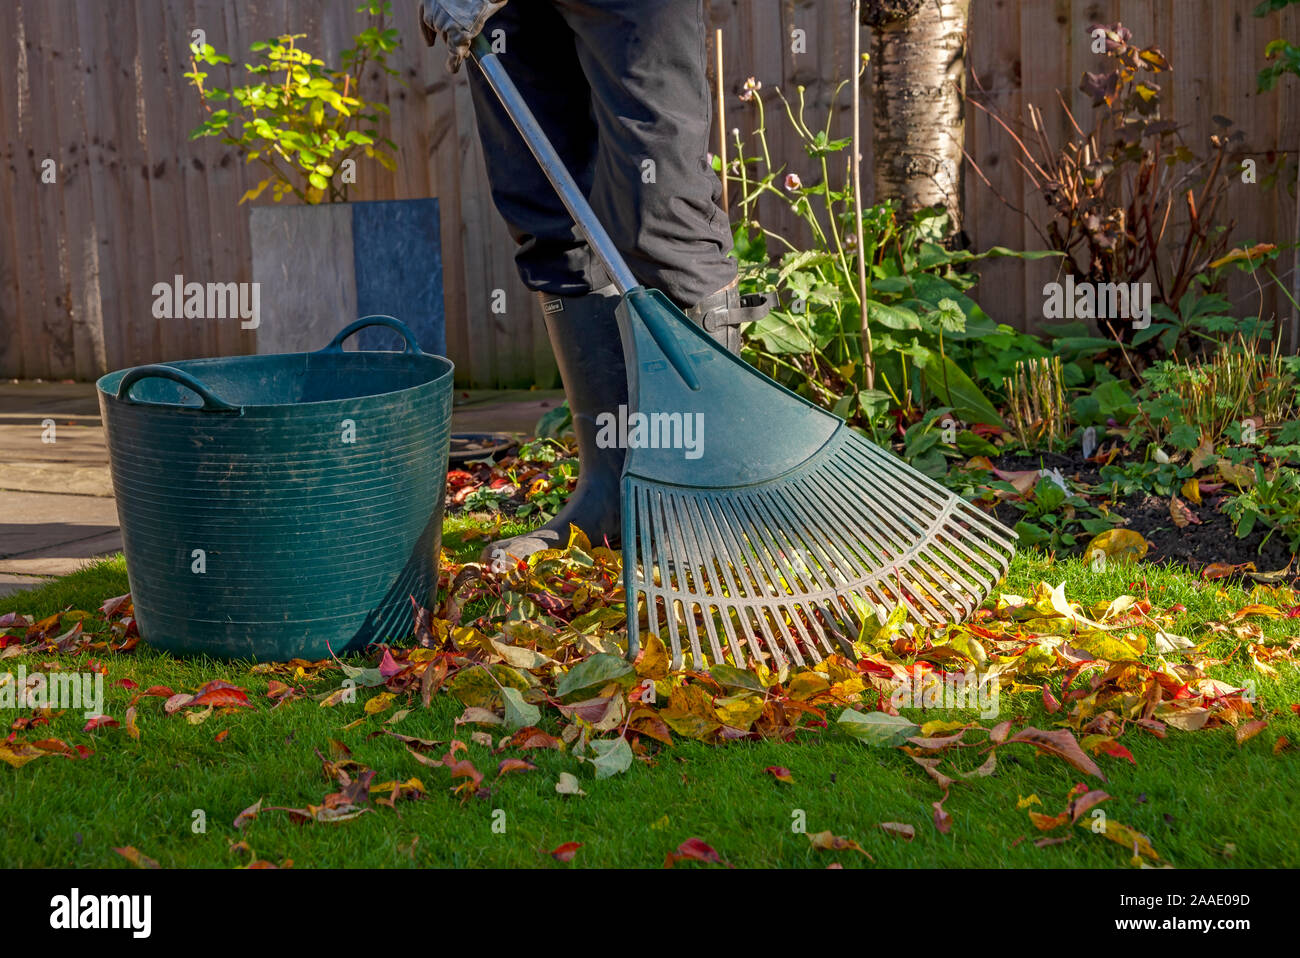 Close up of person man gardener raking sweeping collecting gathering fallen leaves from a grass lawn in the garden in autumn England UK Britain Stock Photo